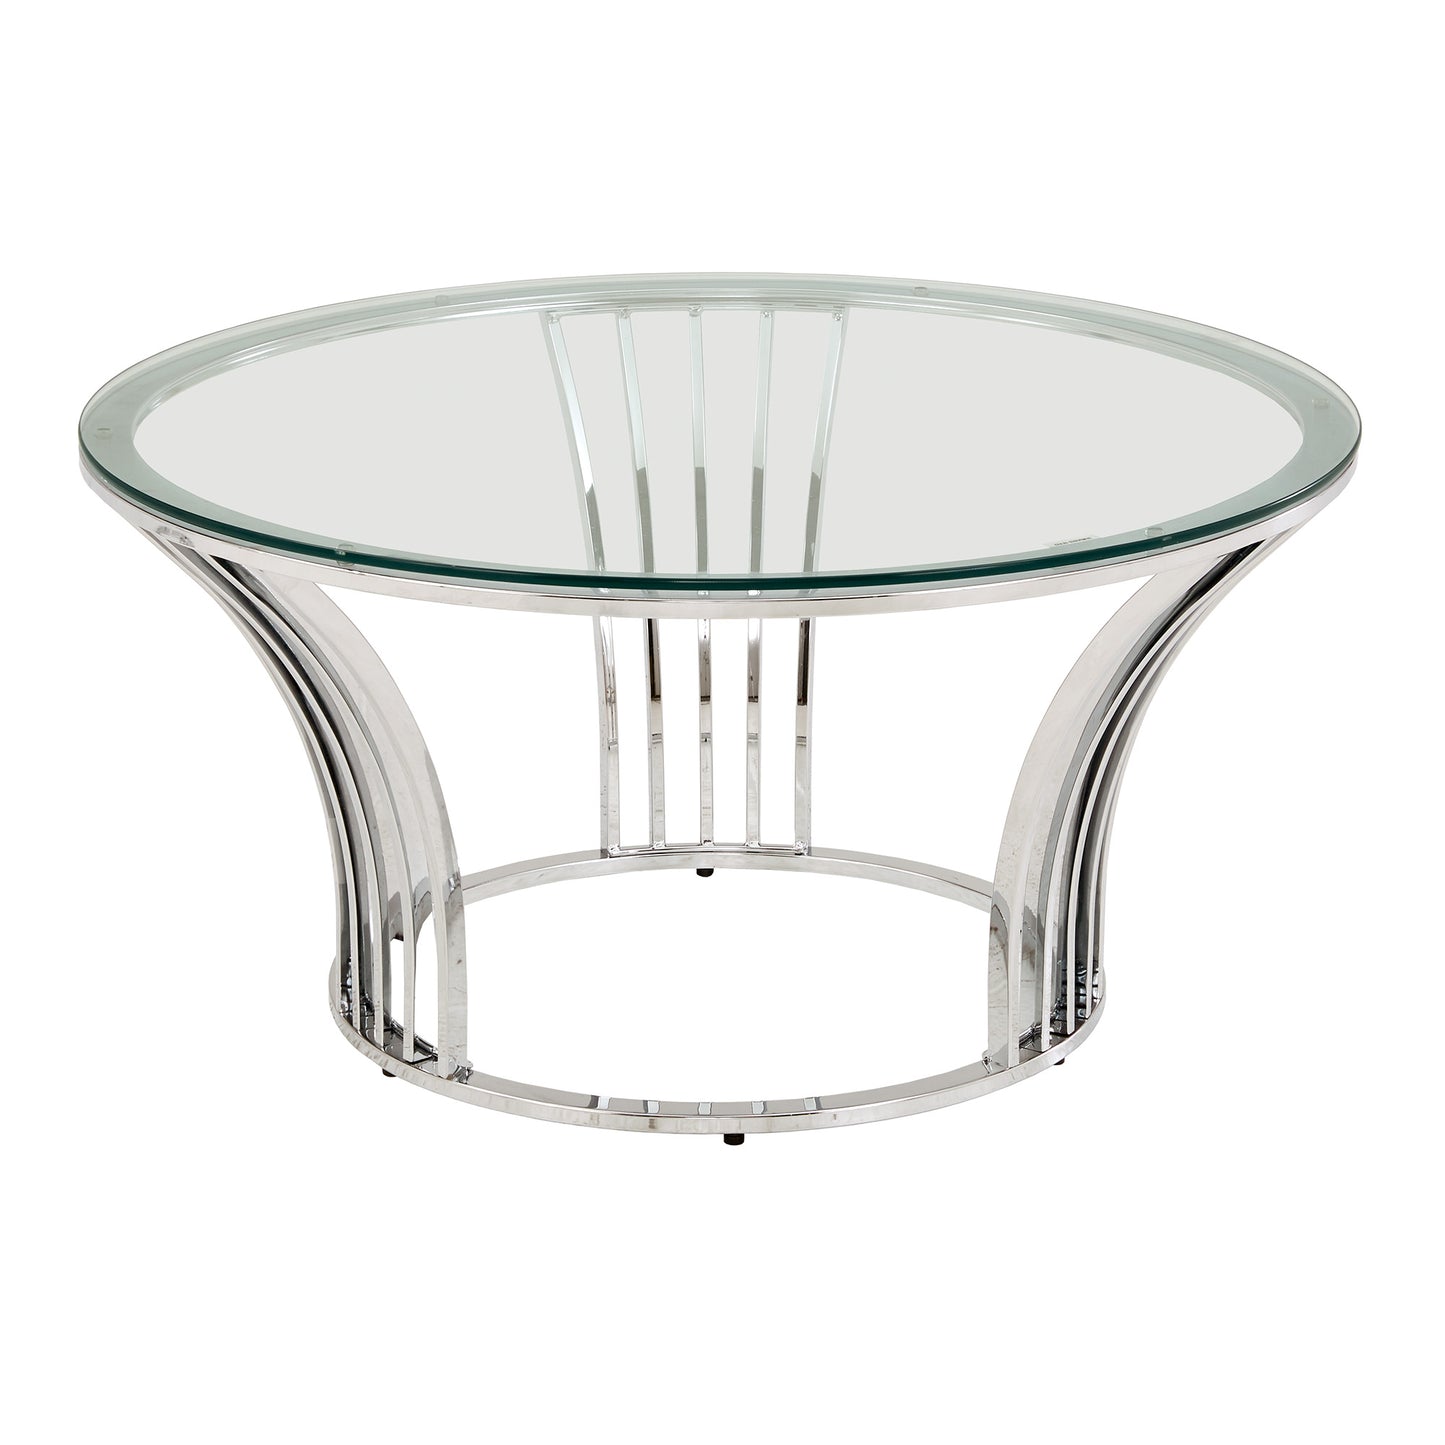 Chrome Finish Table with Glass Top - Coffee Table